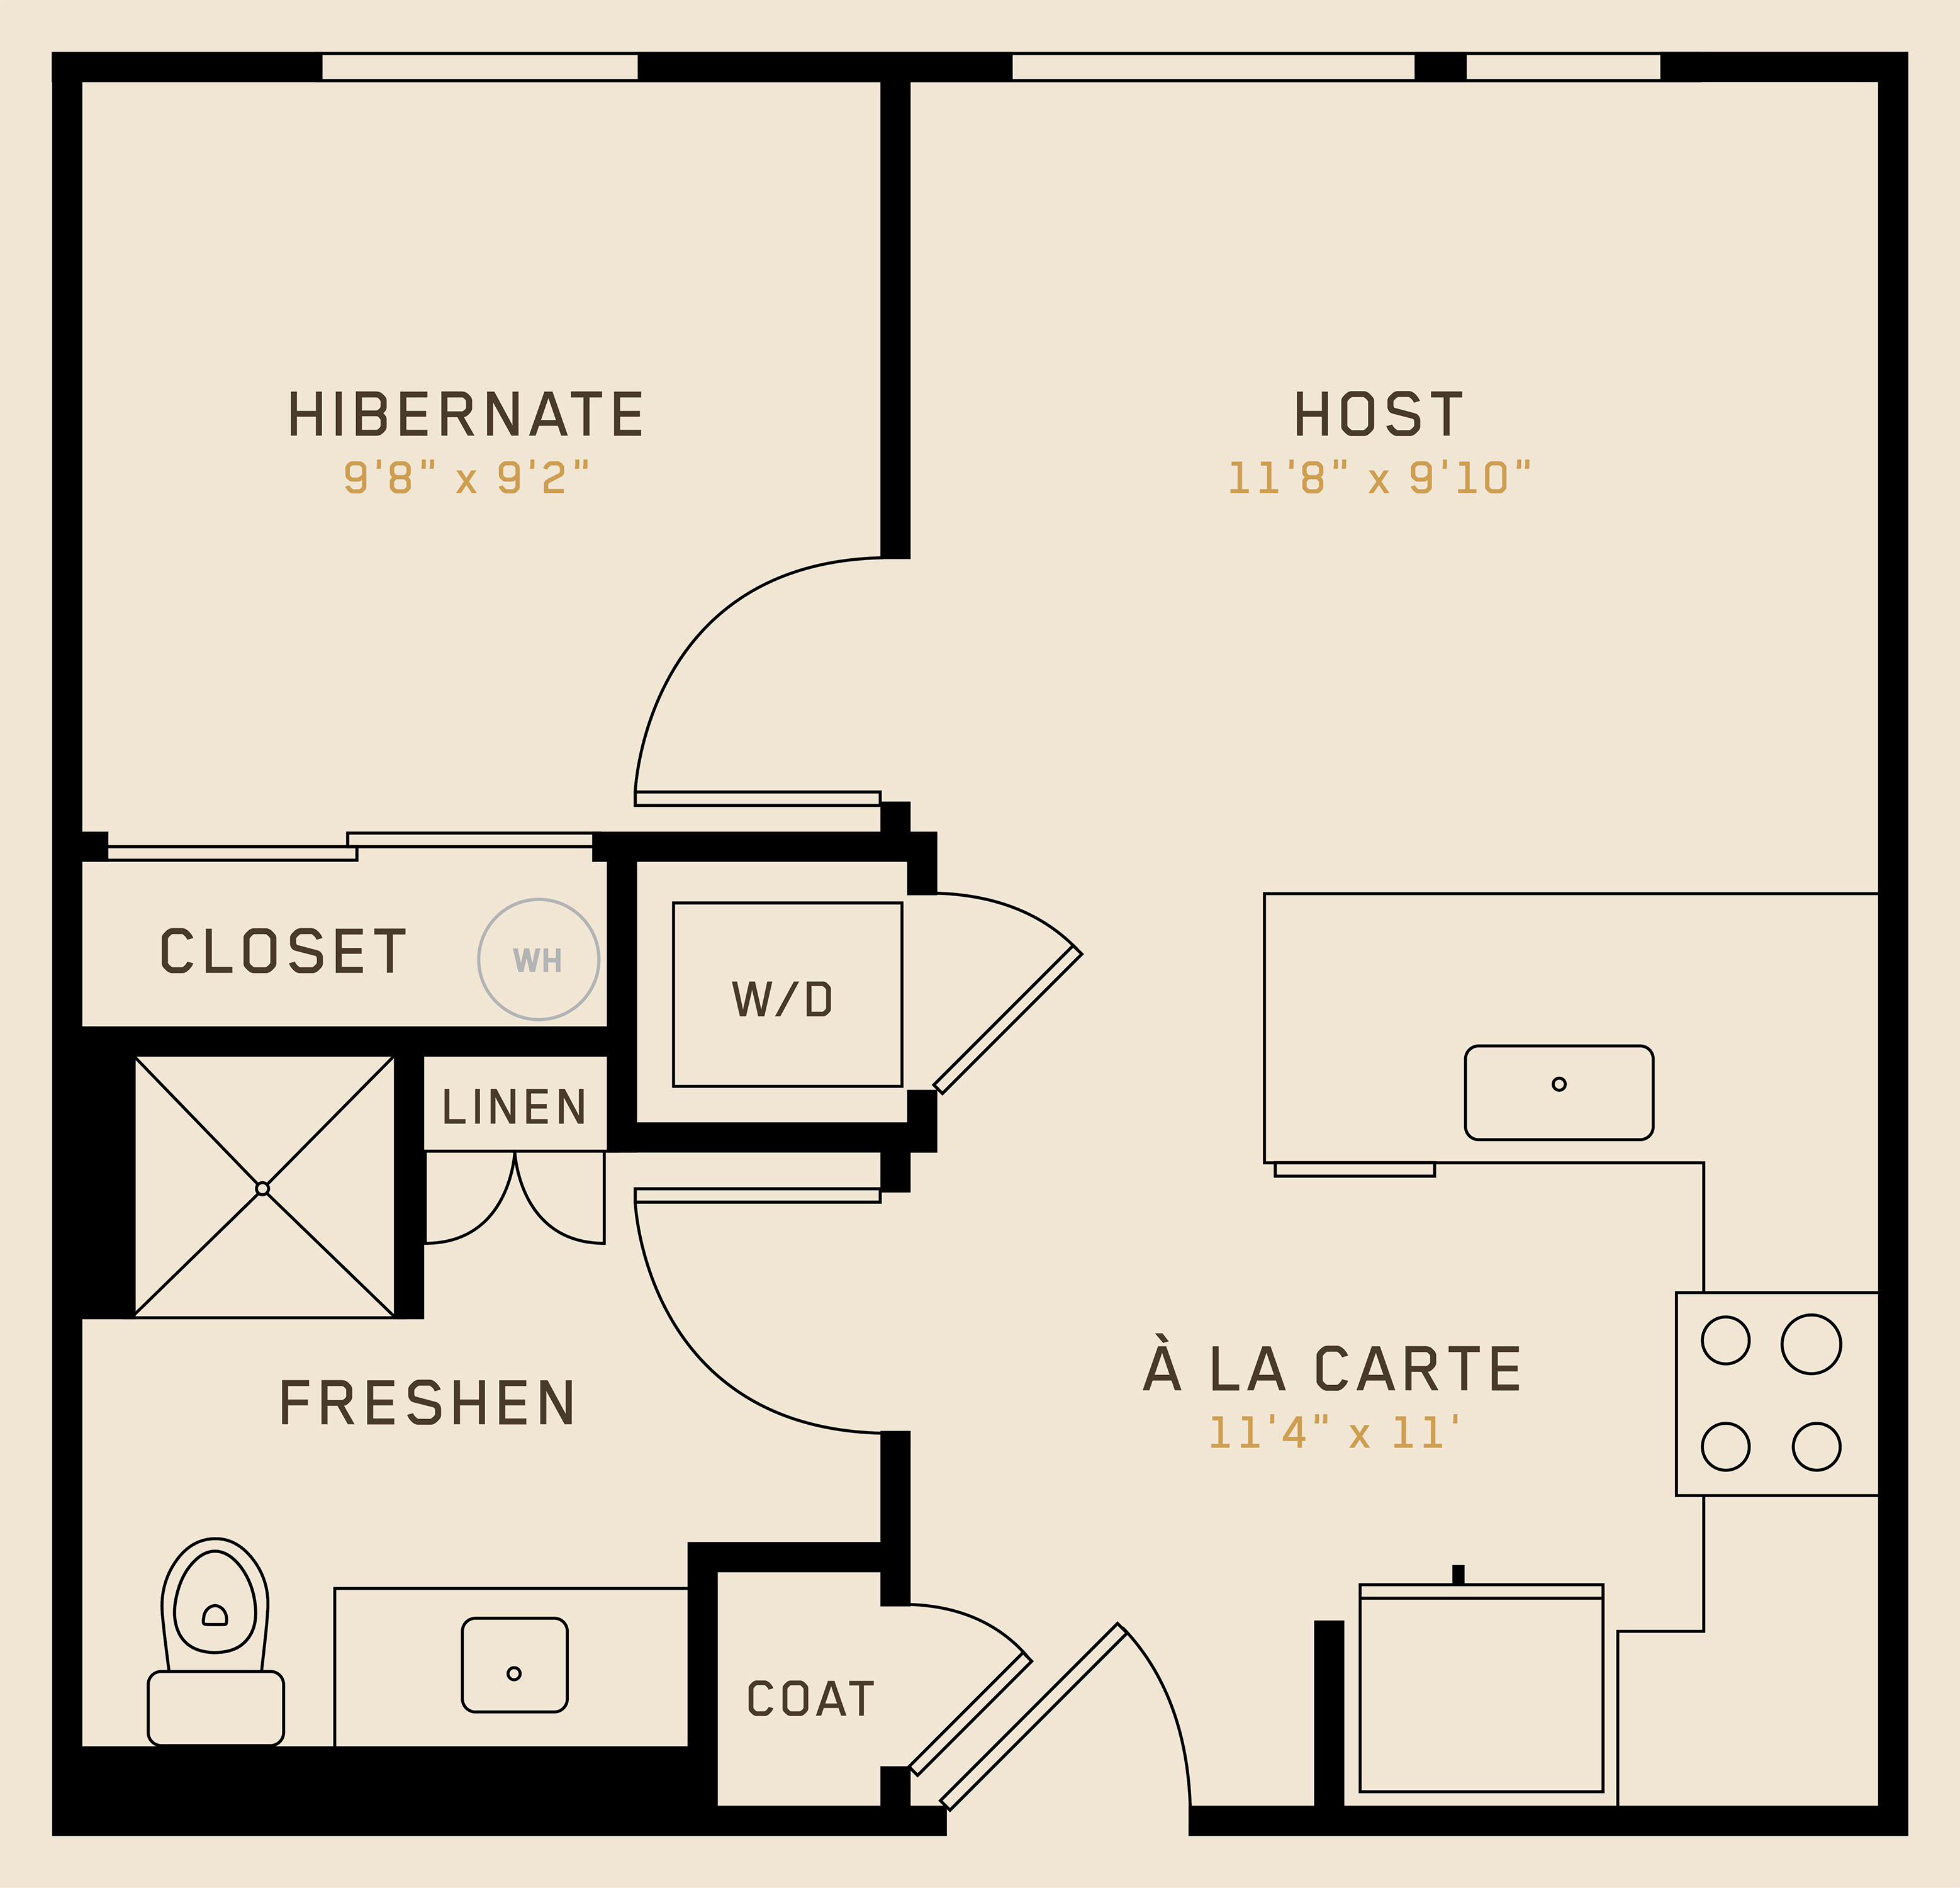 A1A floor plan featuring 1 bedroom, 1 bathroom, and is 475 square feet